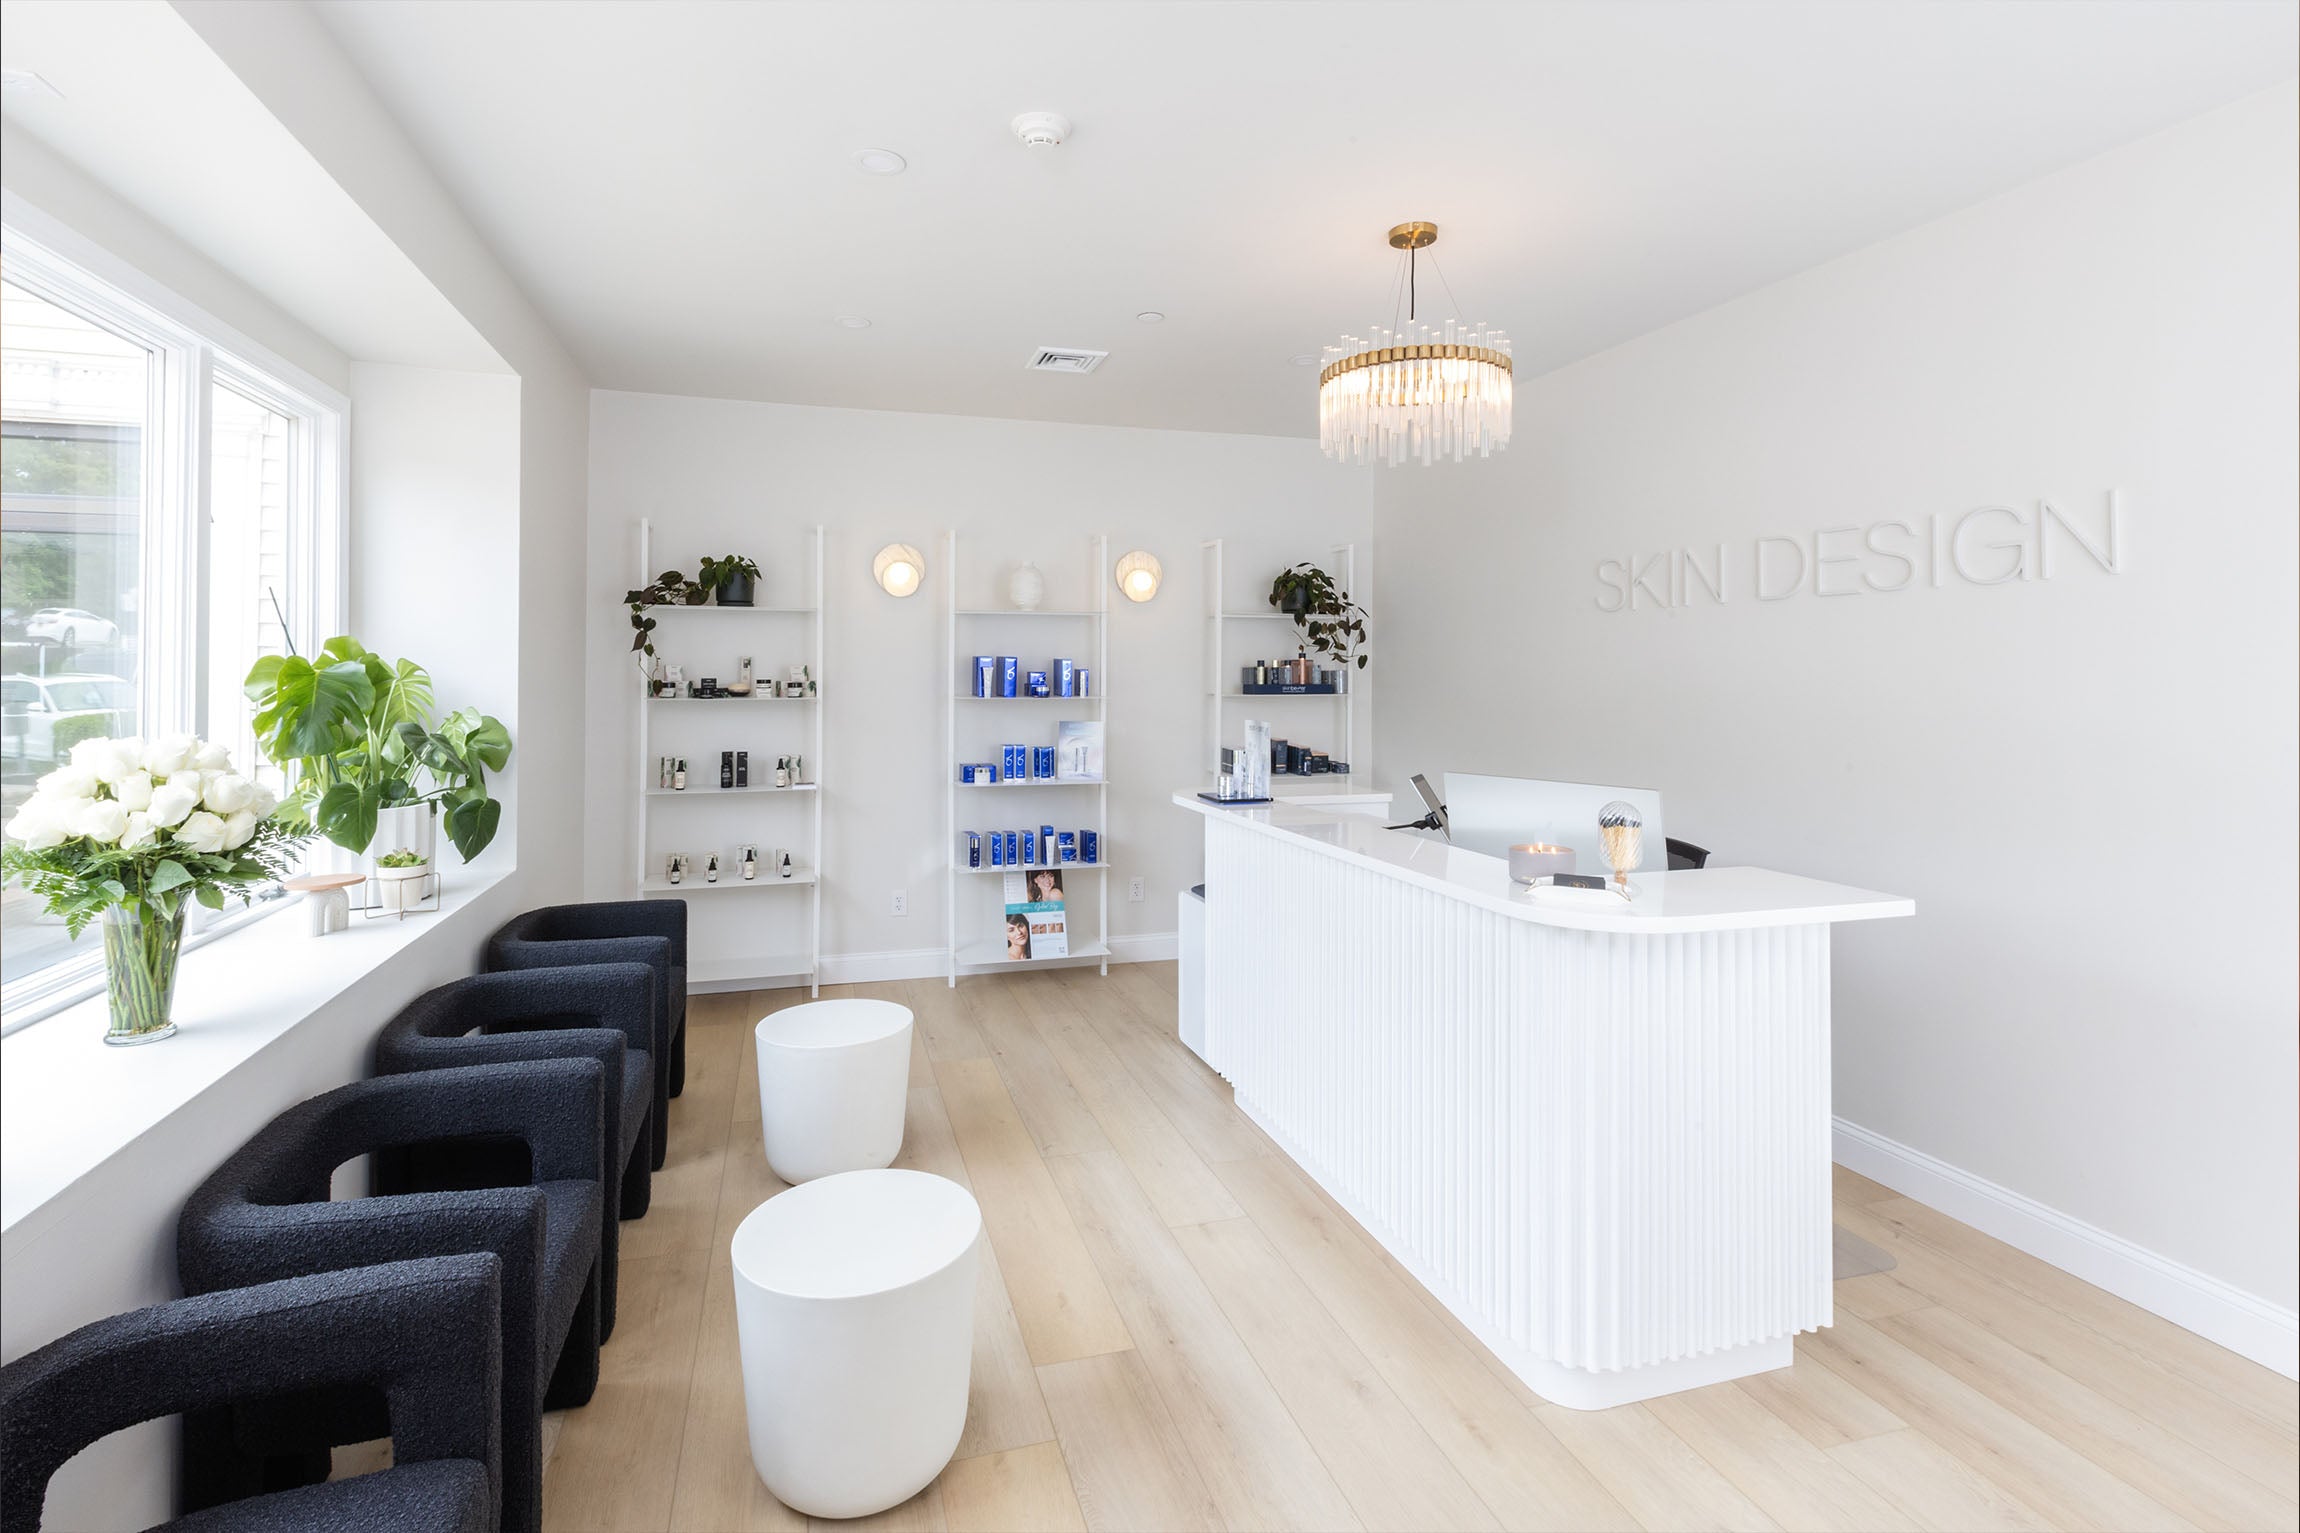 Skin Design Aesthetics Medical Spa in South Shore, MA waiting room with chairs and skincare on the far wall